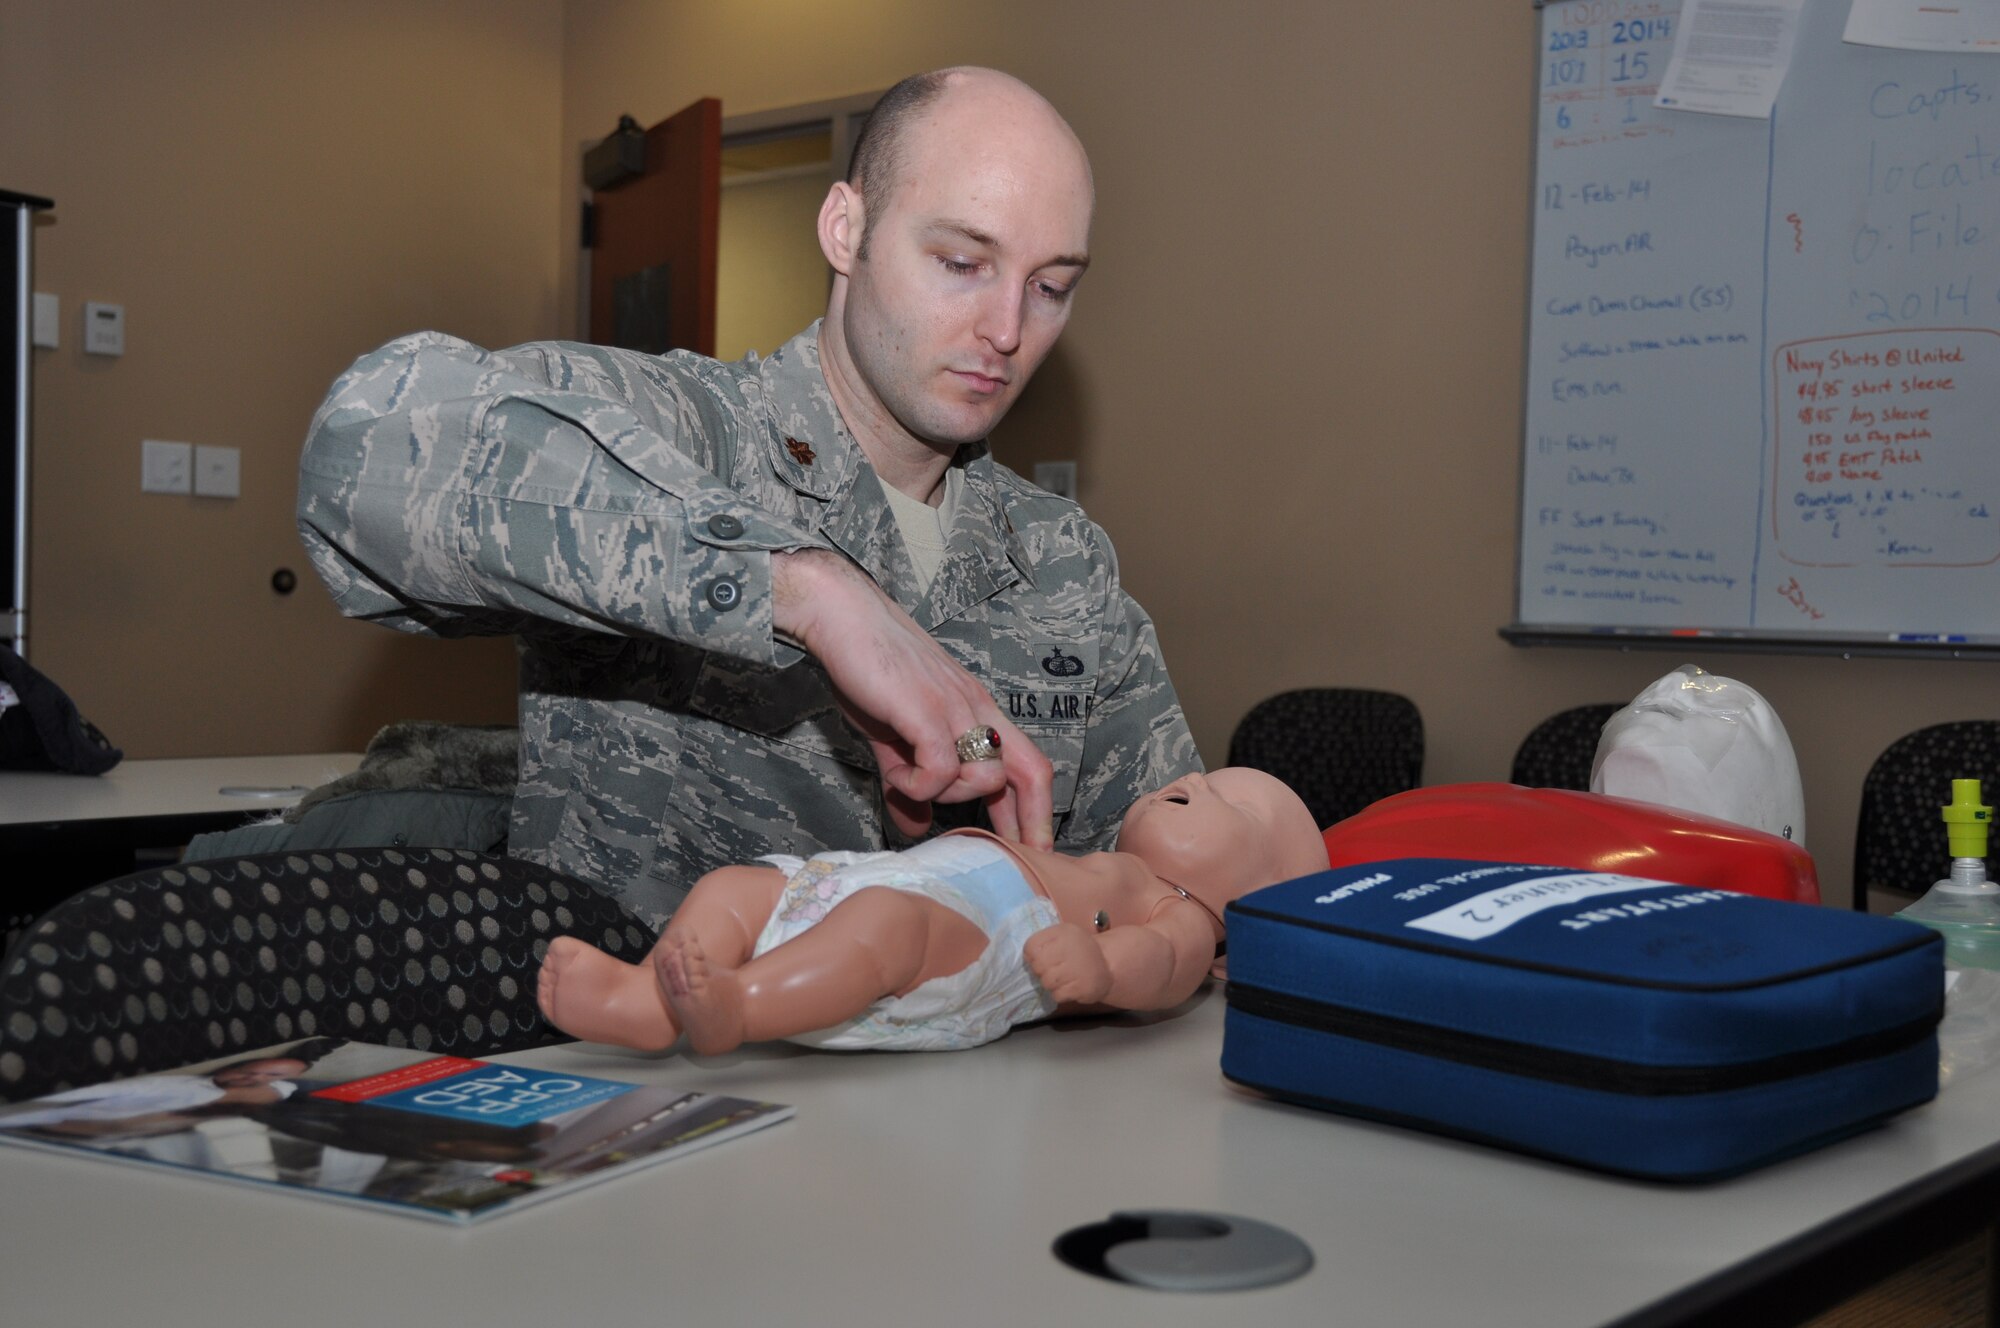 Major Joel McKowan, 914th Airlift Wing, participates in a CPR class here, February 28, 2014. The CPR course is offered once a month and covers instructions for CPR for adults, children and infants as well as the procedures for using an automated external defibrillator.  (U.S. Air Force photo by Staff Sgt. Stephanie Clark)  